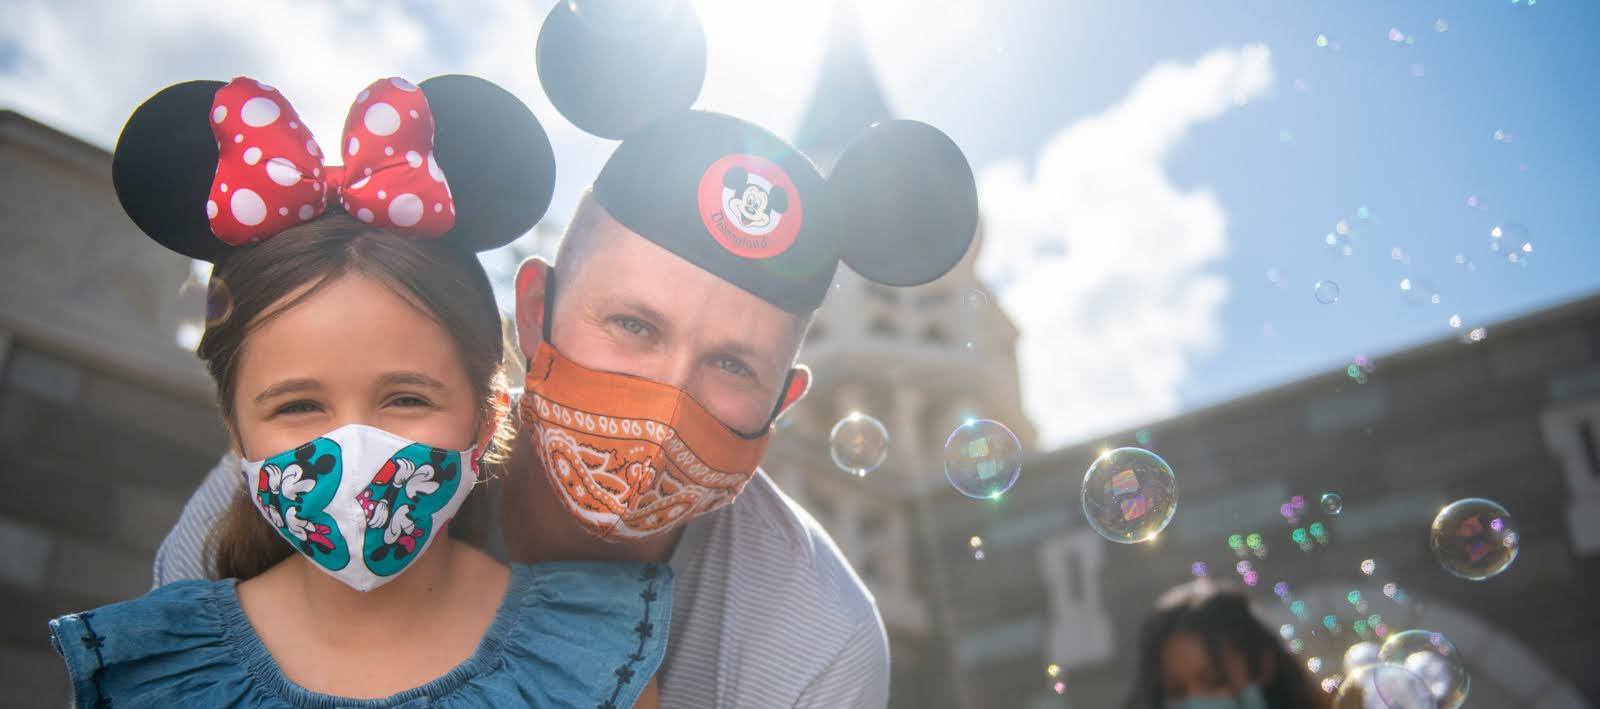 Guests allowed to remove Face Masks for Disney's Photopass Photos